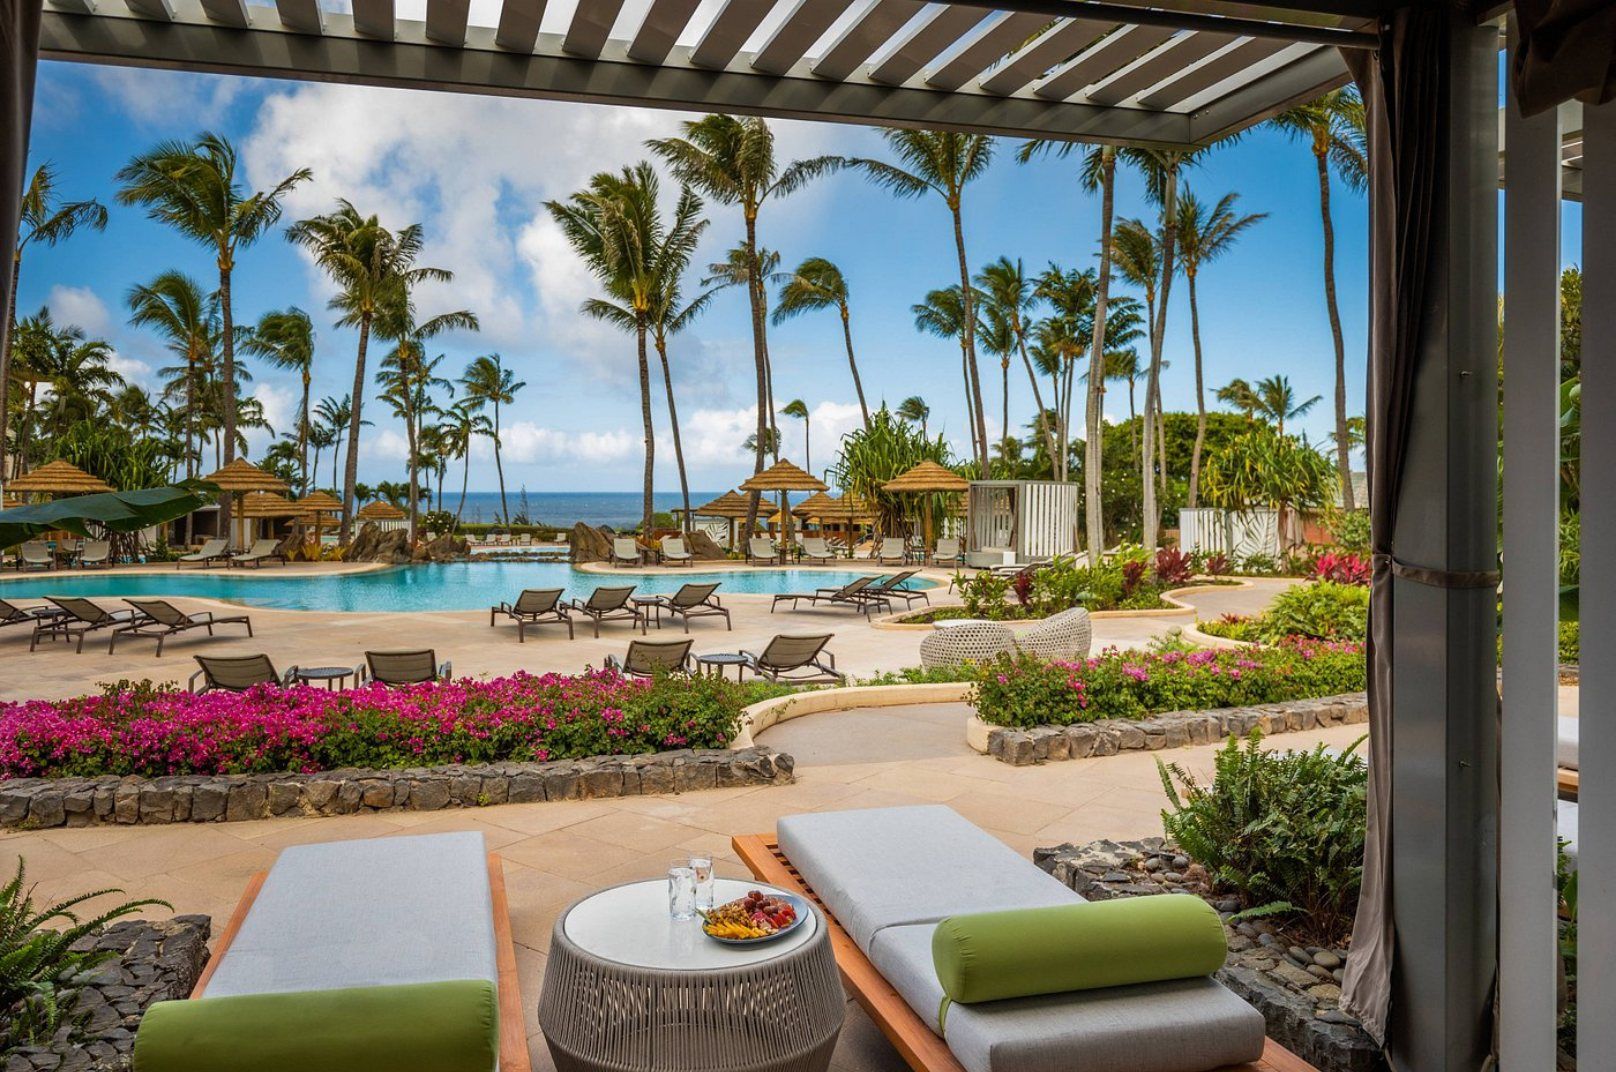 The most romantic hotels in Maui